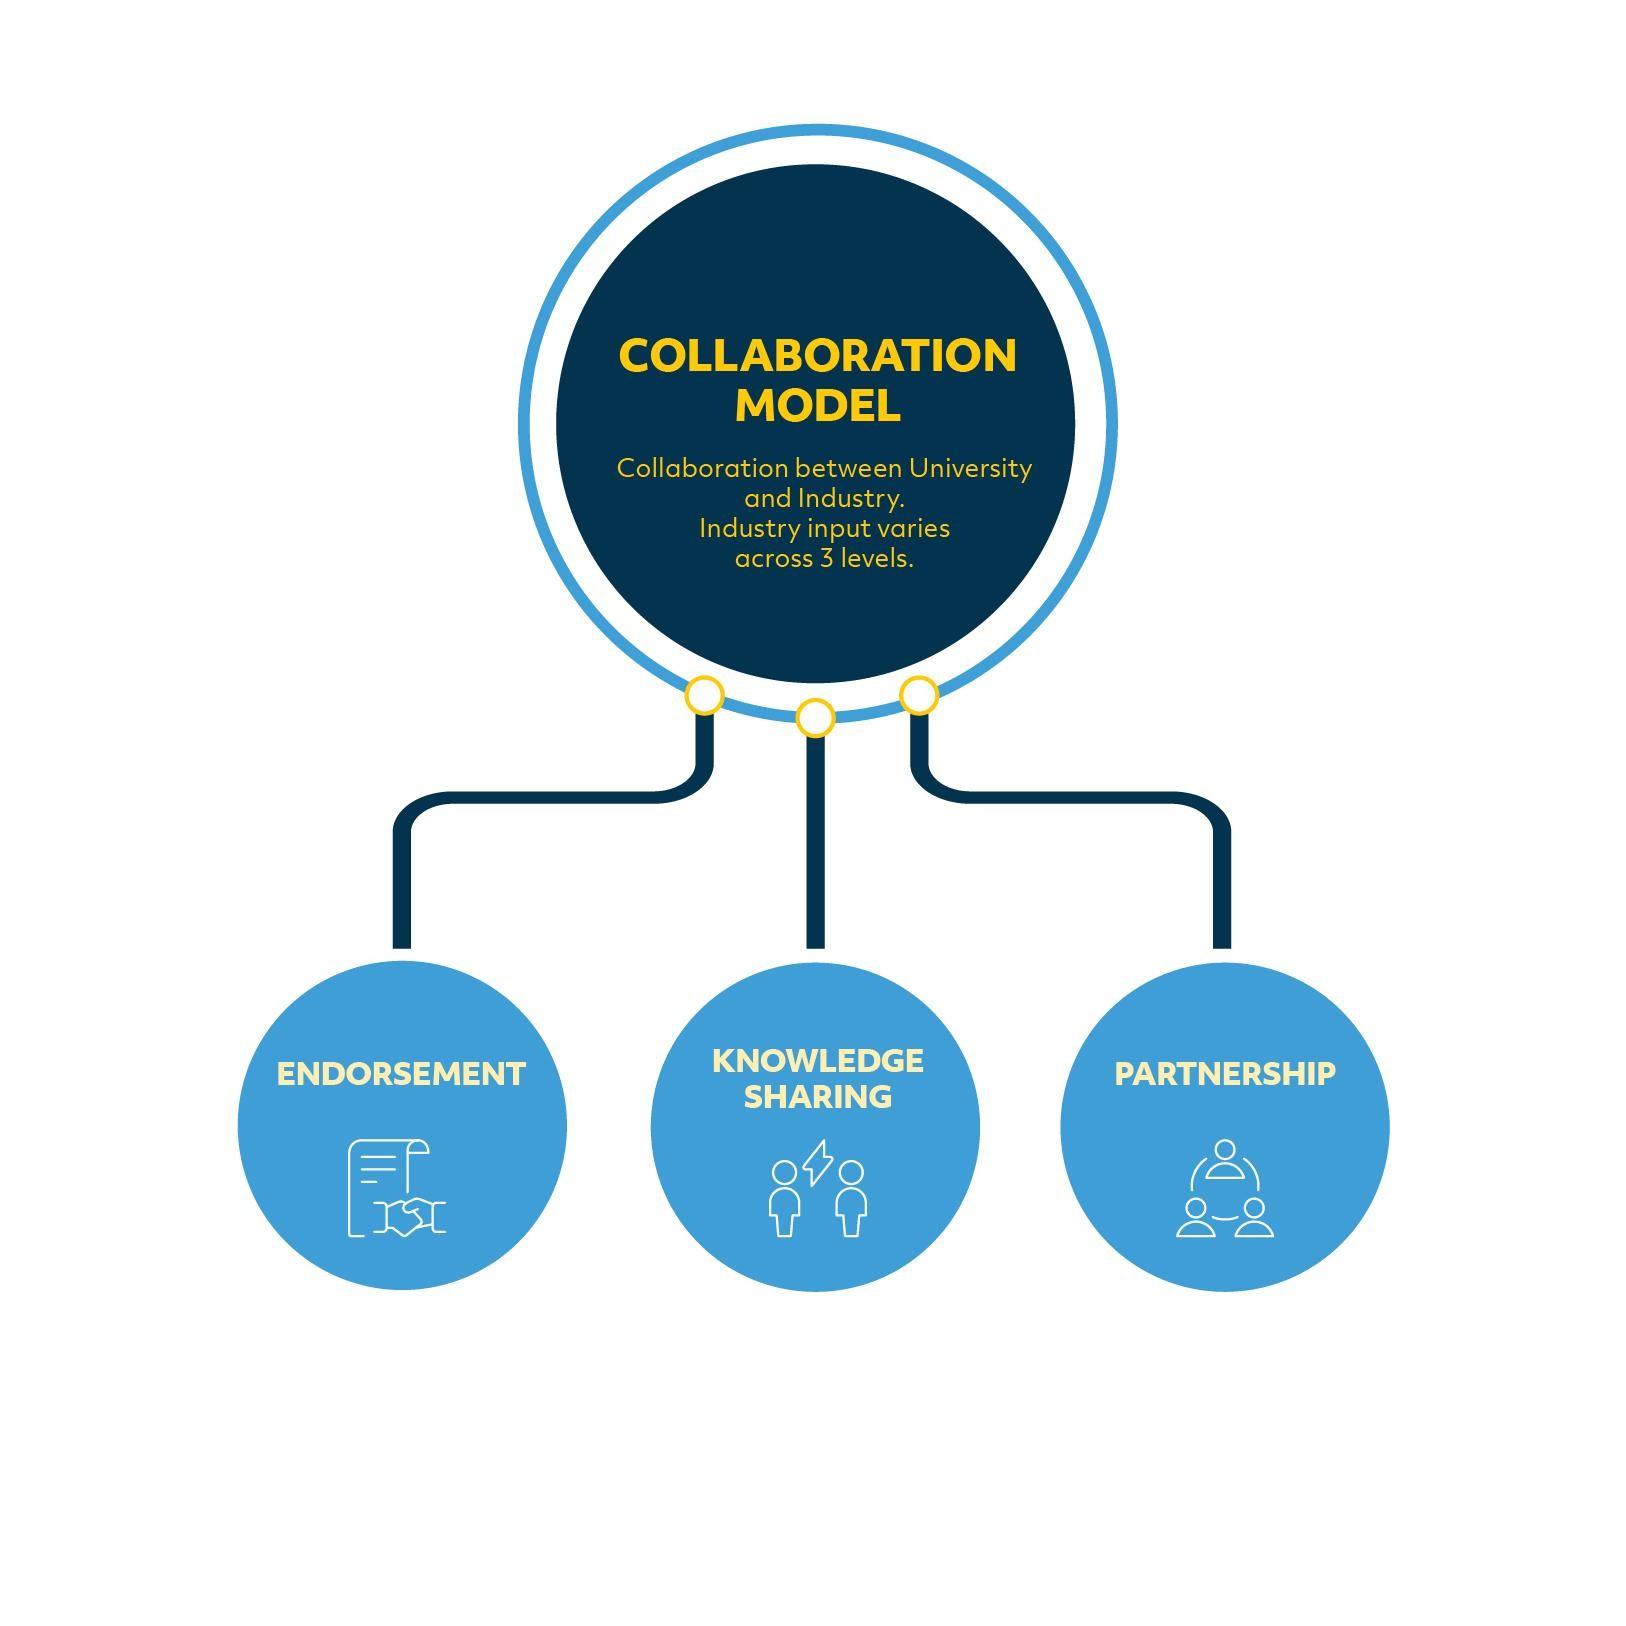 This graphic displays the three DCU Collaboration Models. 1. Endorsement, 2. Knowledge sharing and 3. Partnership. Each model is a collaboration between the University and Industry. Industry input varies across the three models.